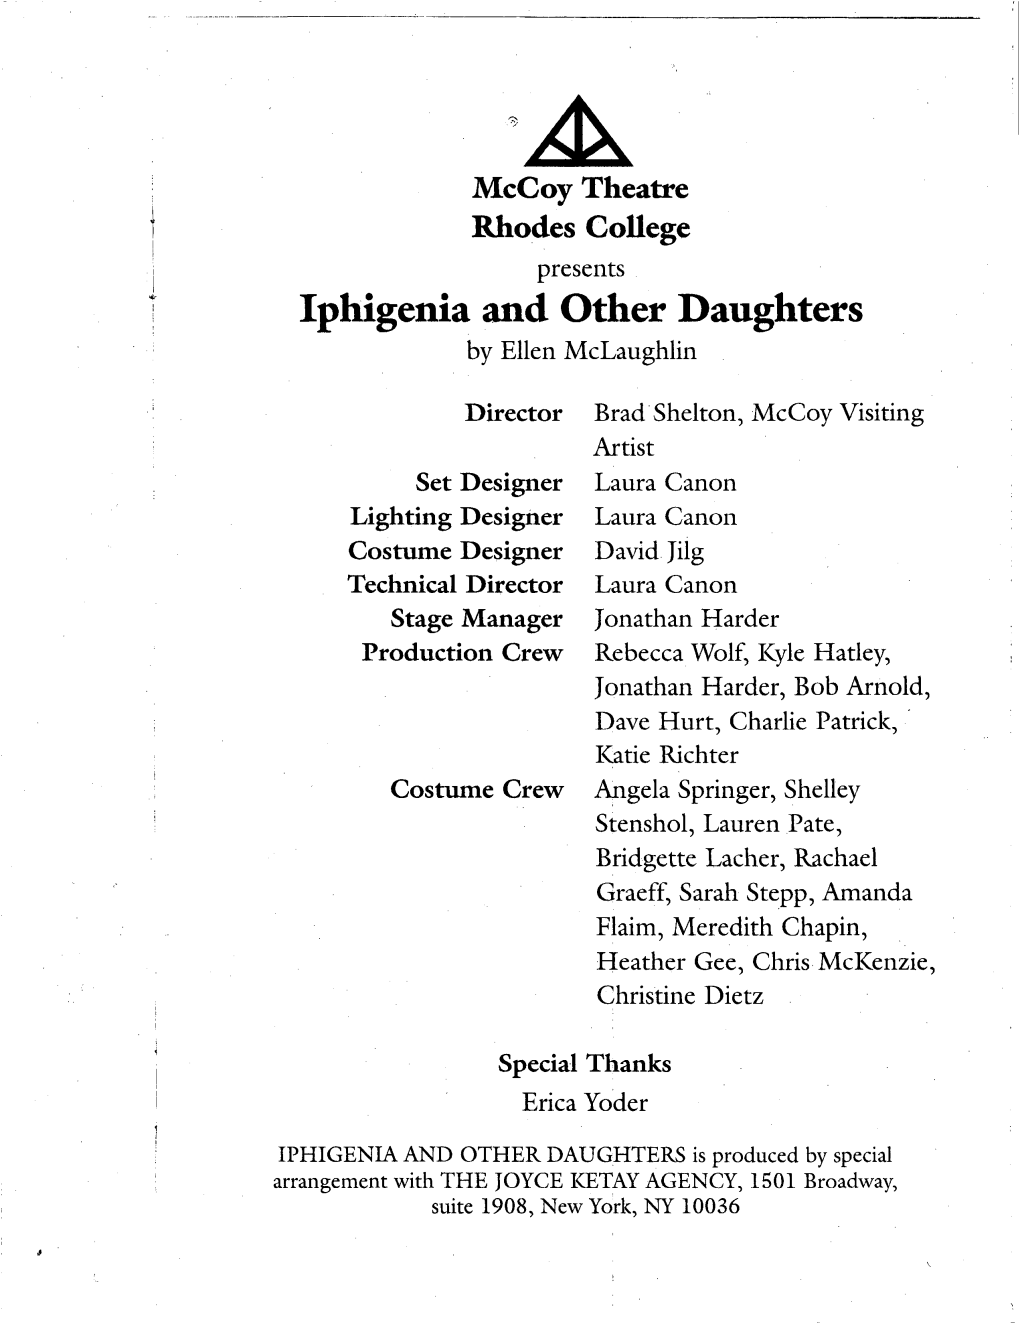 Iphigenia and Other Daughters by Ellen Mclaughlin